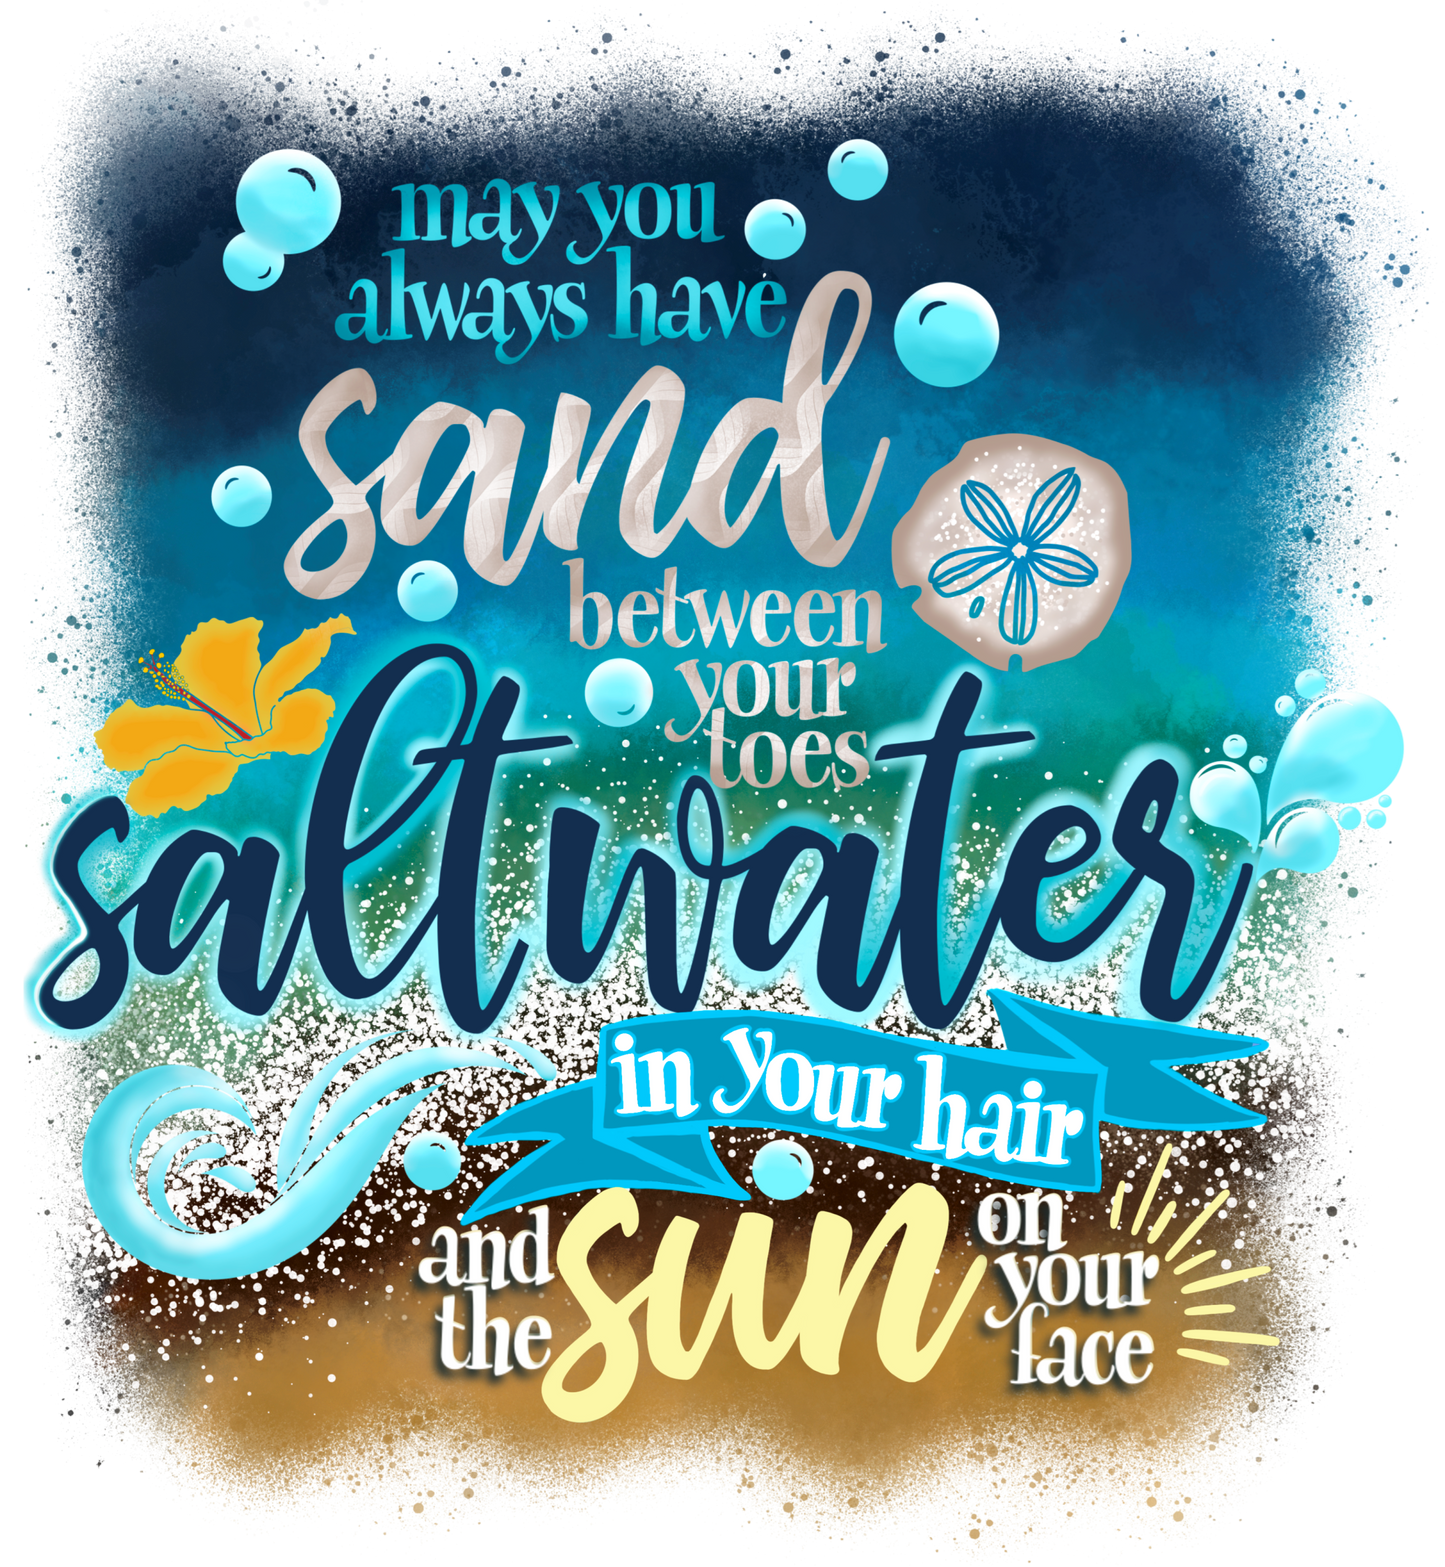 MAY YOU ALWAYS HAVE SAND BETWEEN YOUR TOES SALWATER IN YOUR HAIR AND THE SUN IN YOUR FACE